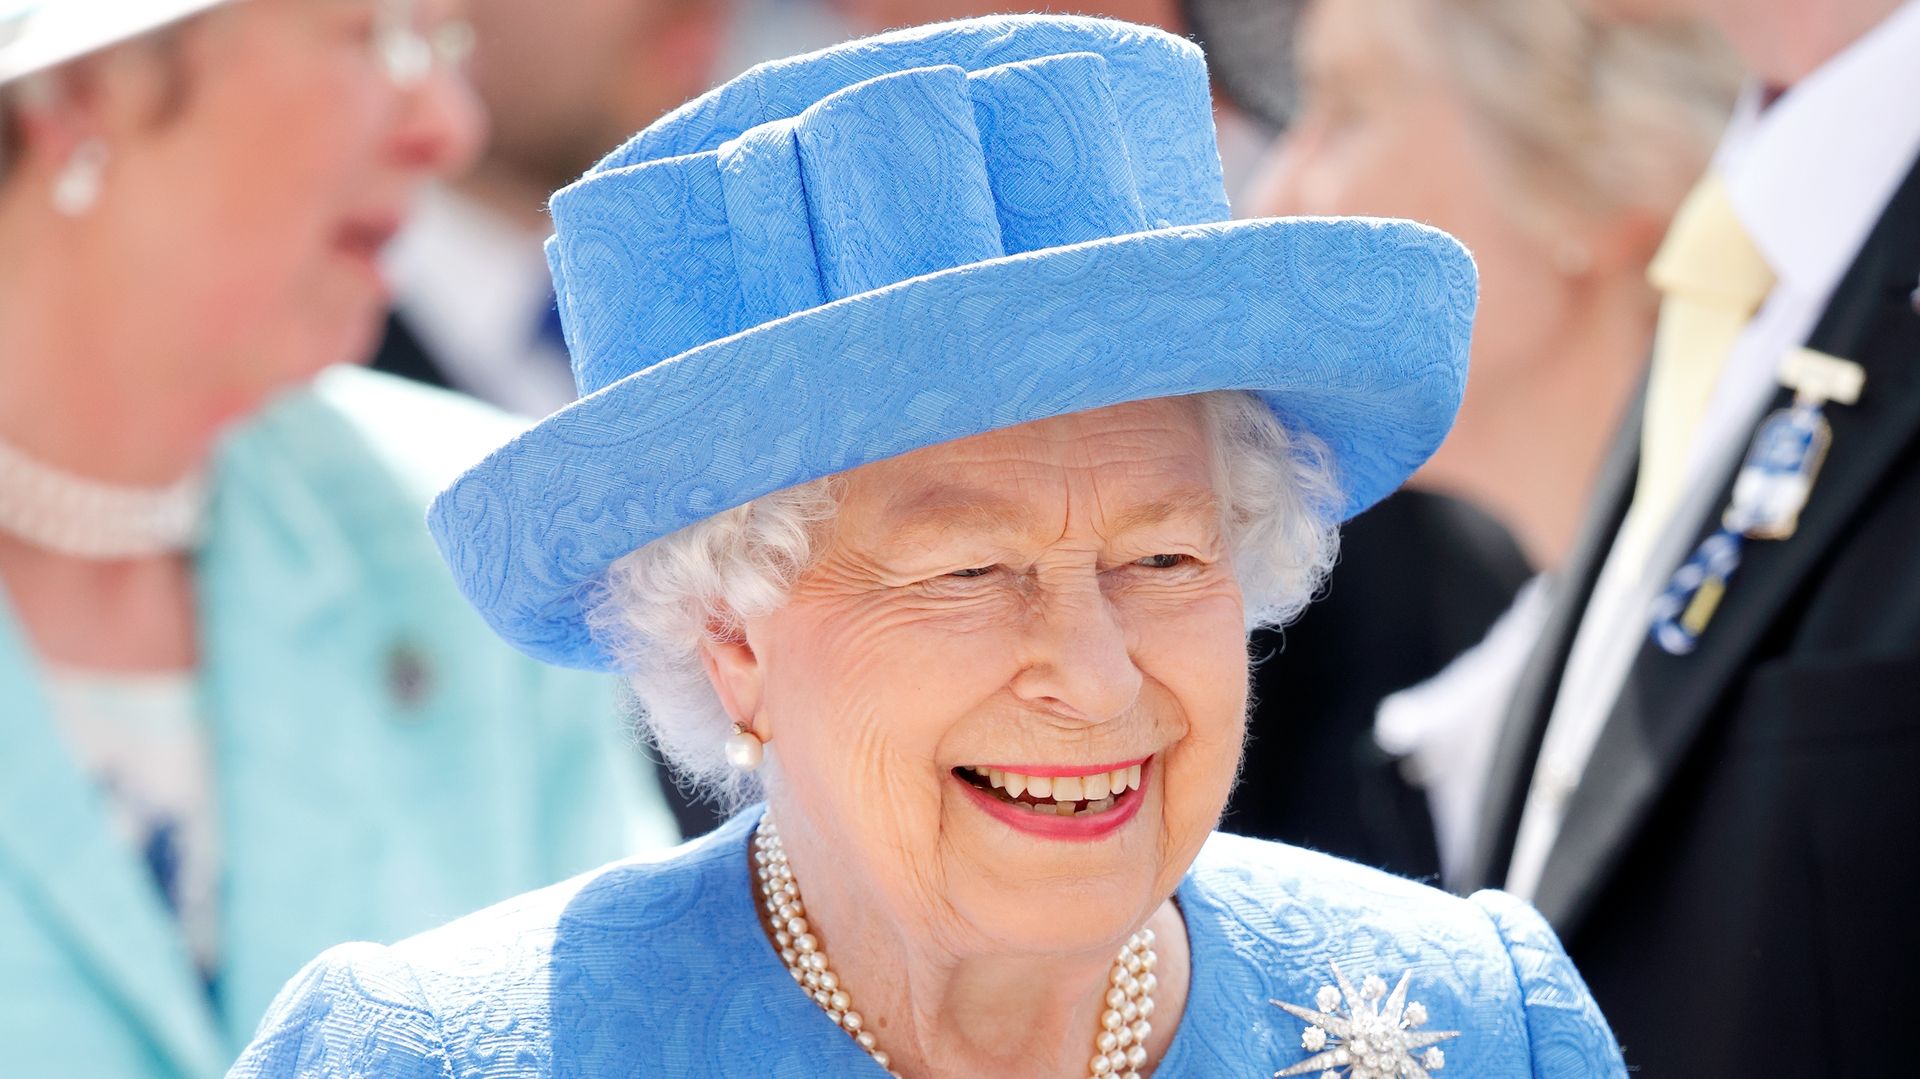 <p>                     One of Queen Elizabeth II’s favourite traditions was said to be an annual game of the festive classic charades, every Christmas Day.                    </p>                                      <p>                     It’s reported that the Queen loved to gather the entire family together on the evening of 25th December for a couple of rounds of the guessing game whilst spending the period at Sandringham. Though it’s not clear whether this is a tradition the royals have maintained since the Queen’s death in September 2022, we’re sure it’s likely that the family are continuing to honour one of her much-loved Christmas pastimes.                   </p>